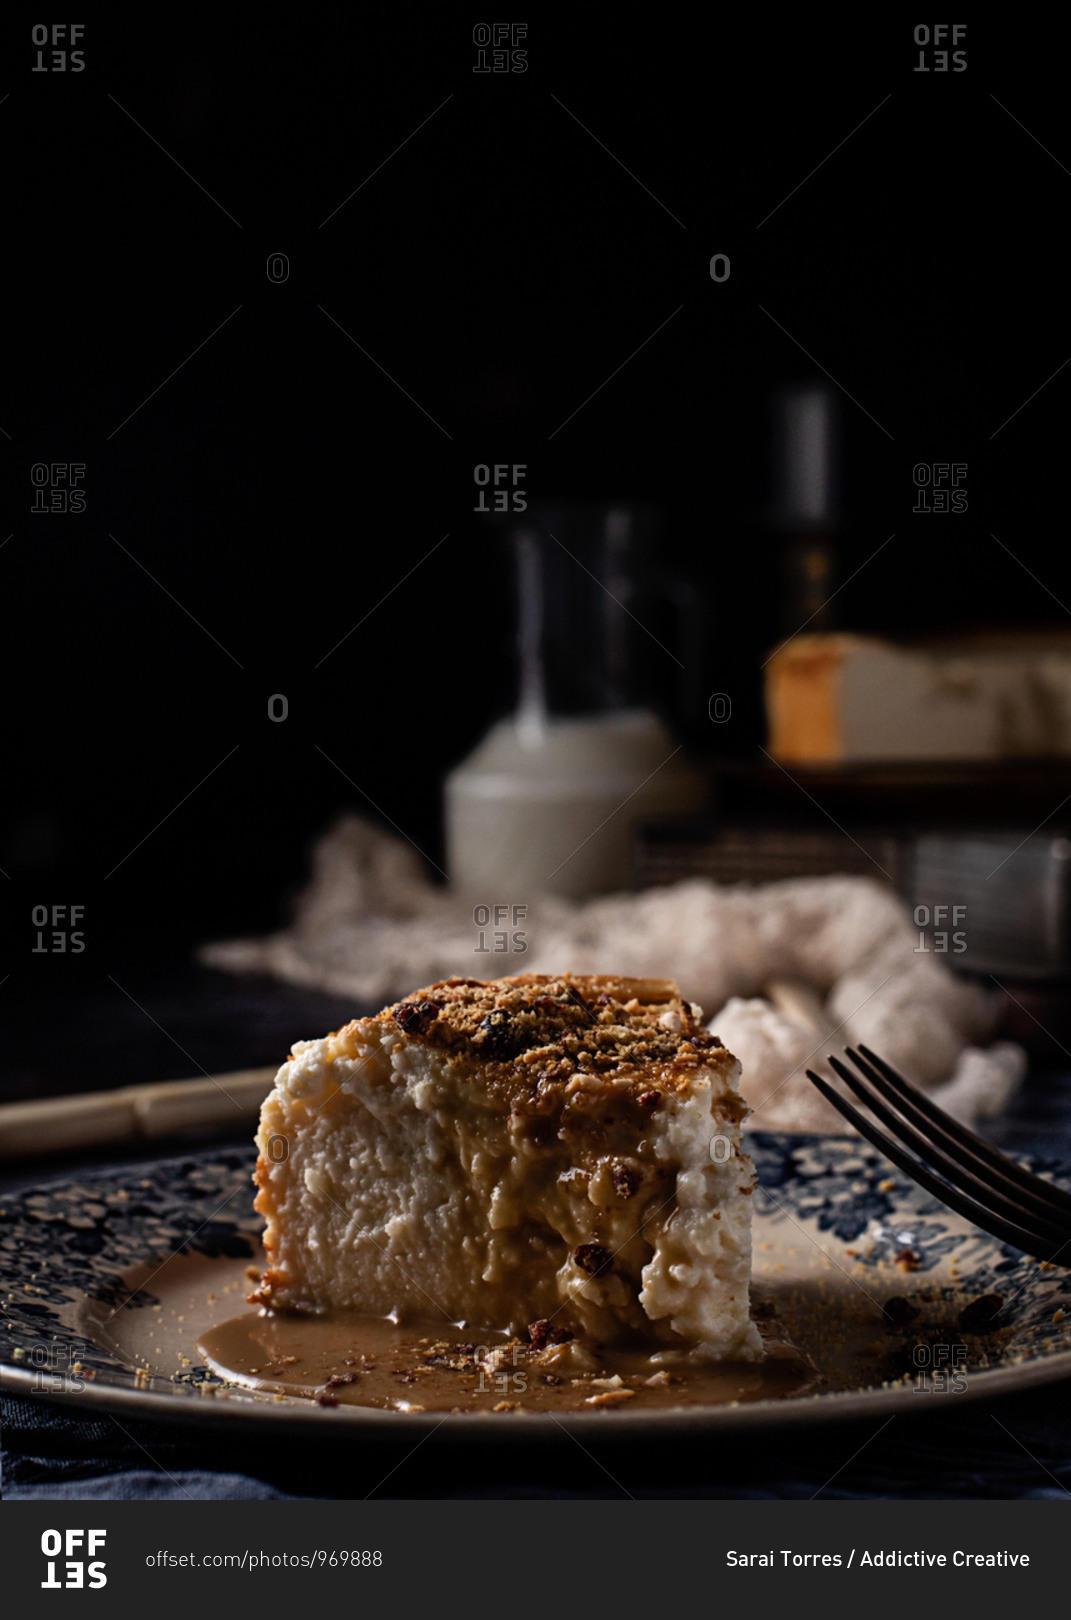 Cheese cake with delicious liquid caramel in composition with ingredients and utensil among delicate fabrics on blue marble table